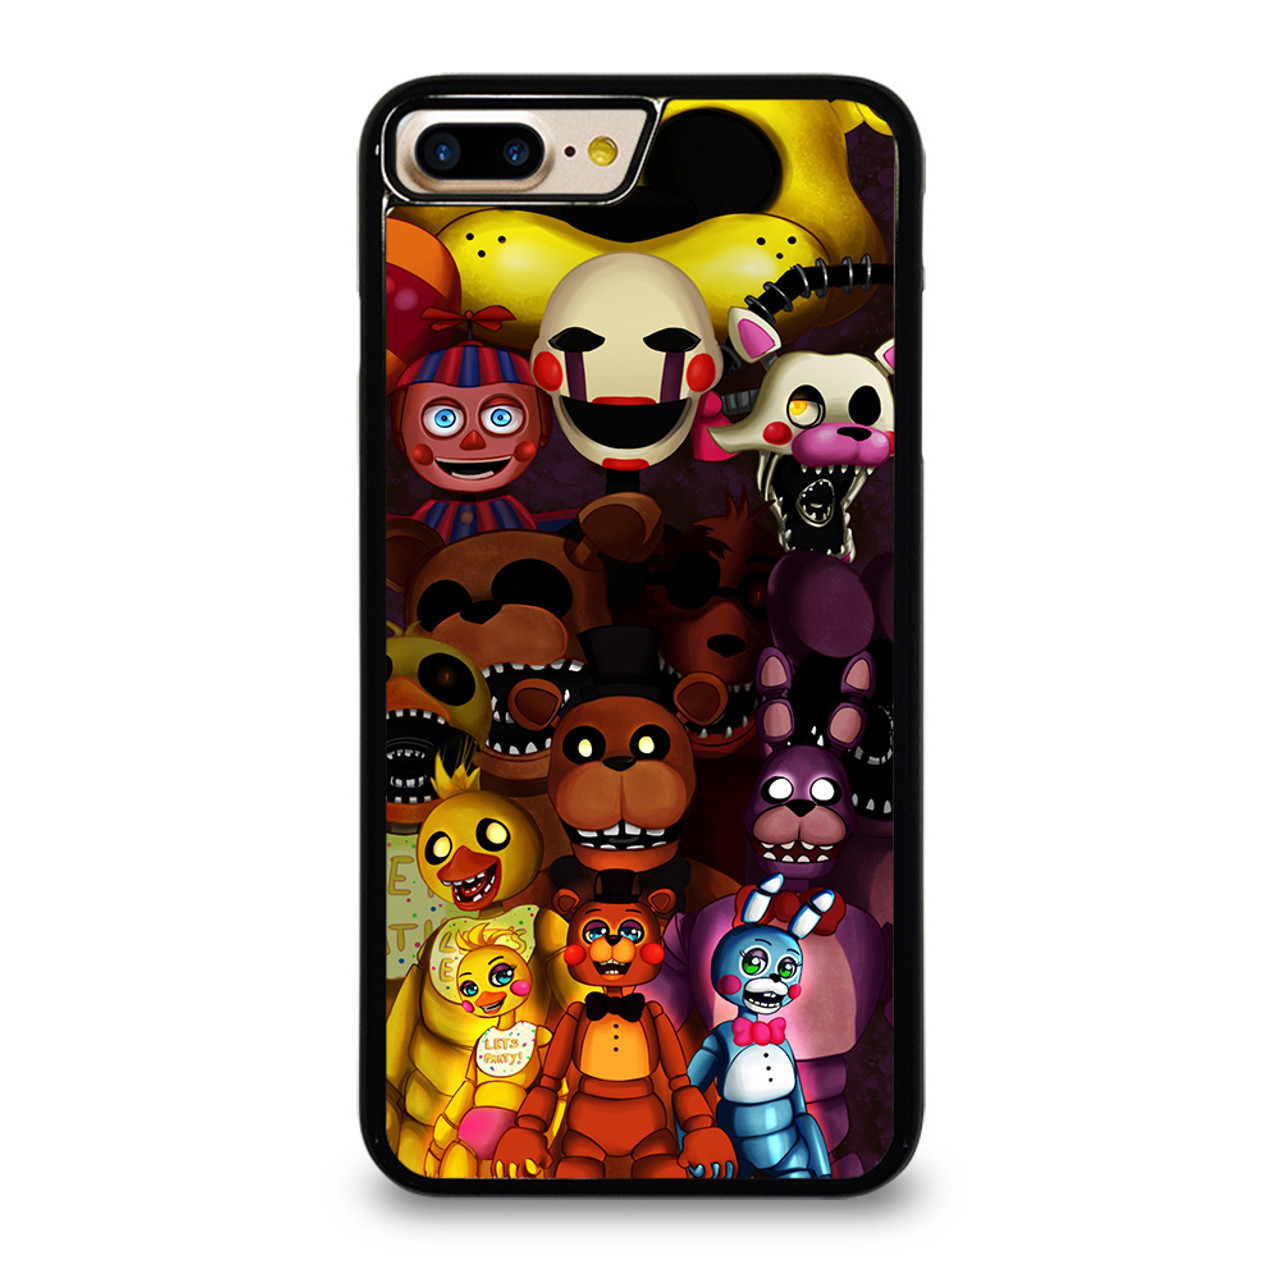 FIVE NIGHTS AT FREDDY'S ALL iPhone 7 Plus Case Cover